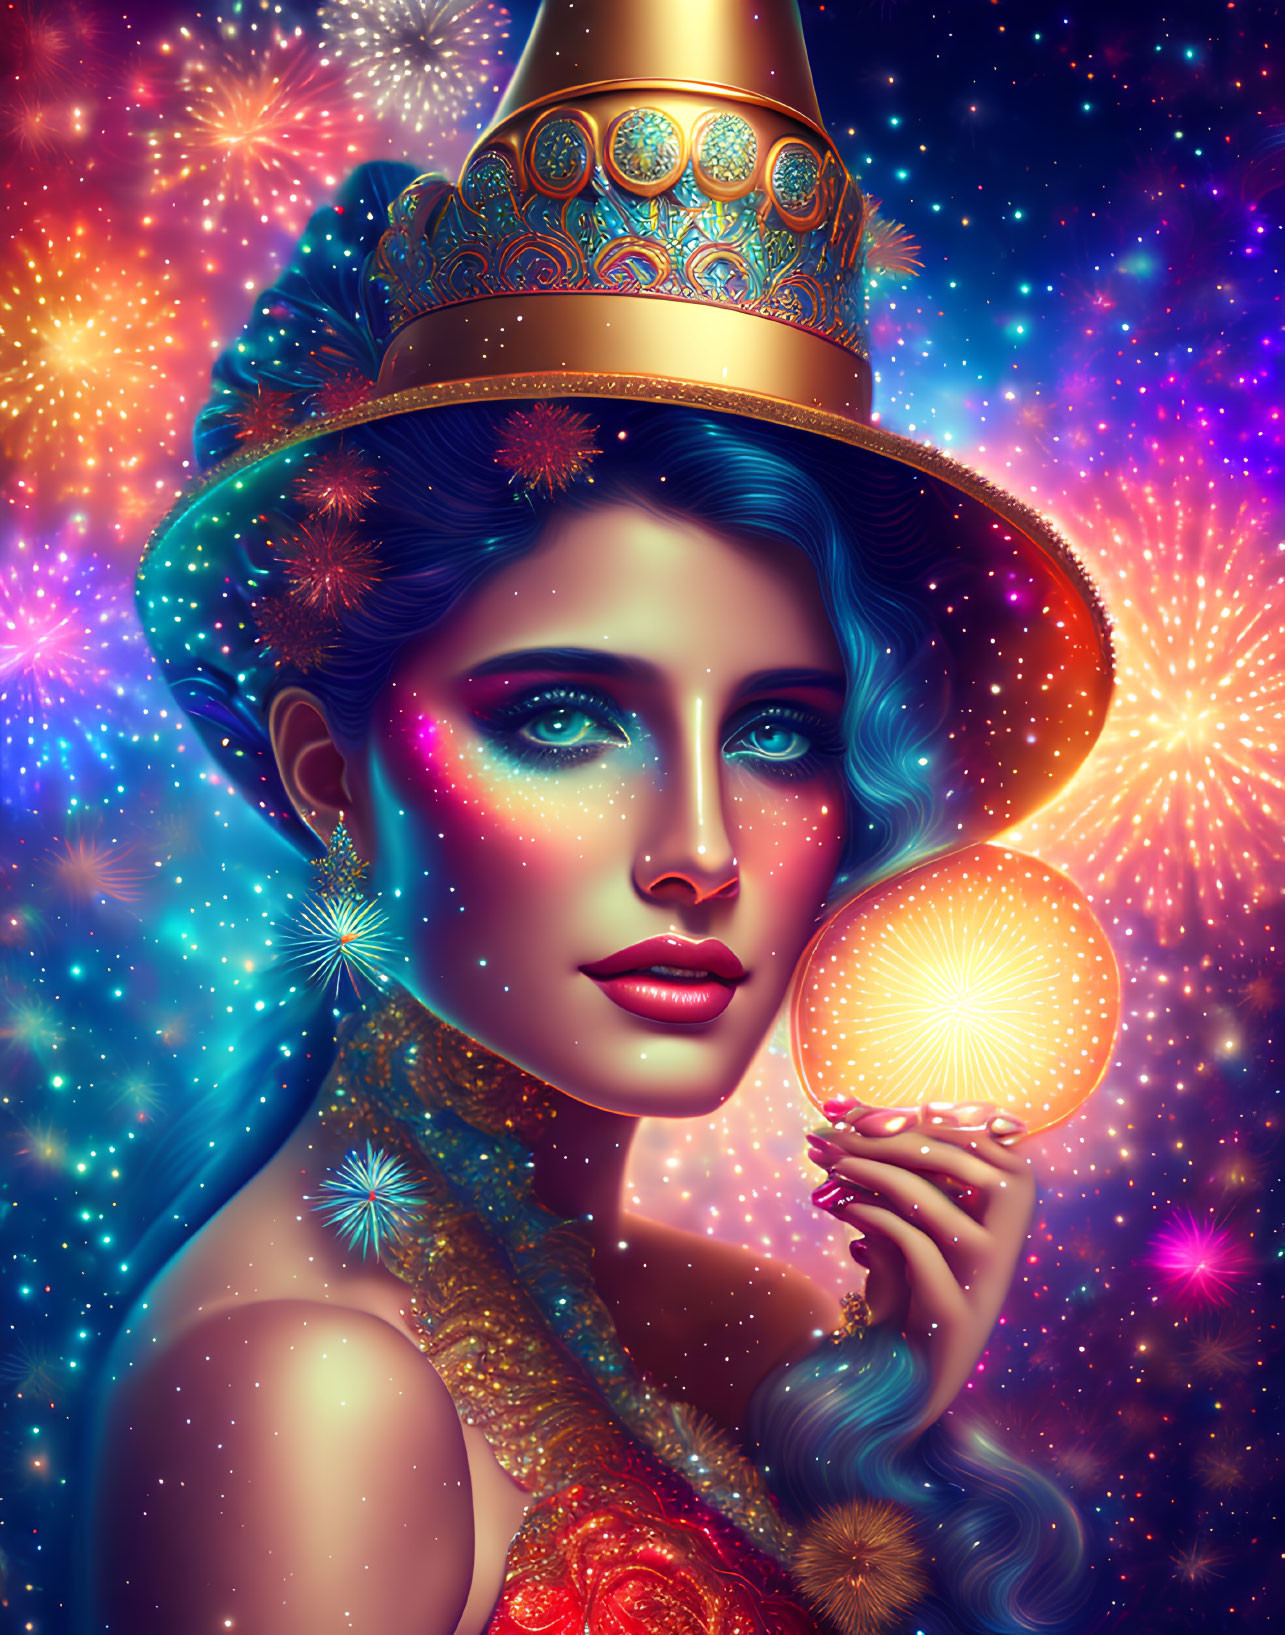 Colorful digital portrait of woman with blue hair and golden hat, holding luminous orb against cosmic backdrop